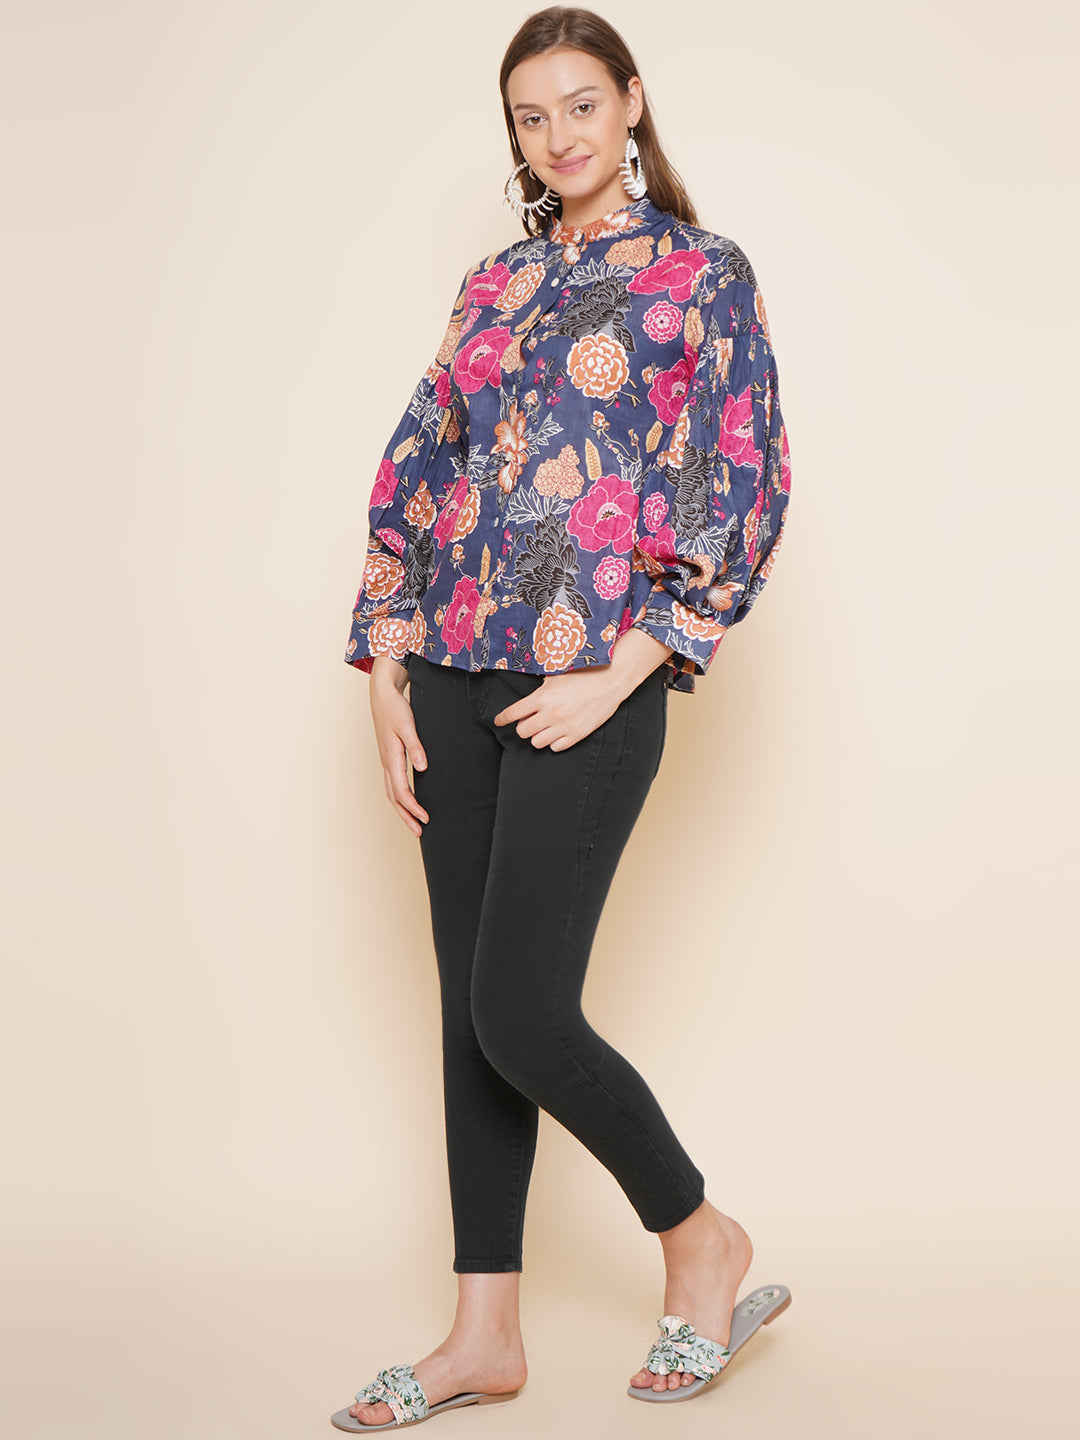 Bhama Couture Blue Floral Printed Shirt Style Top